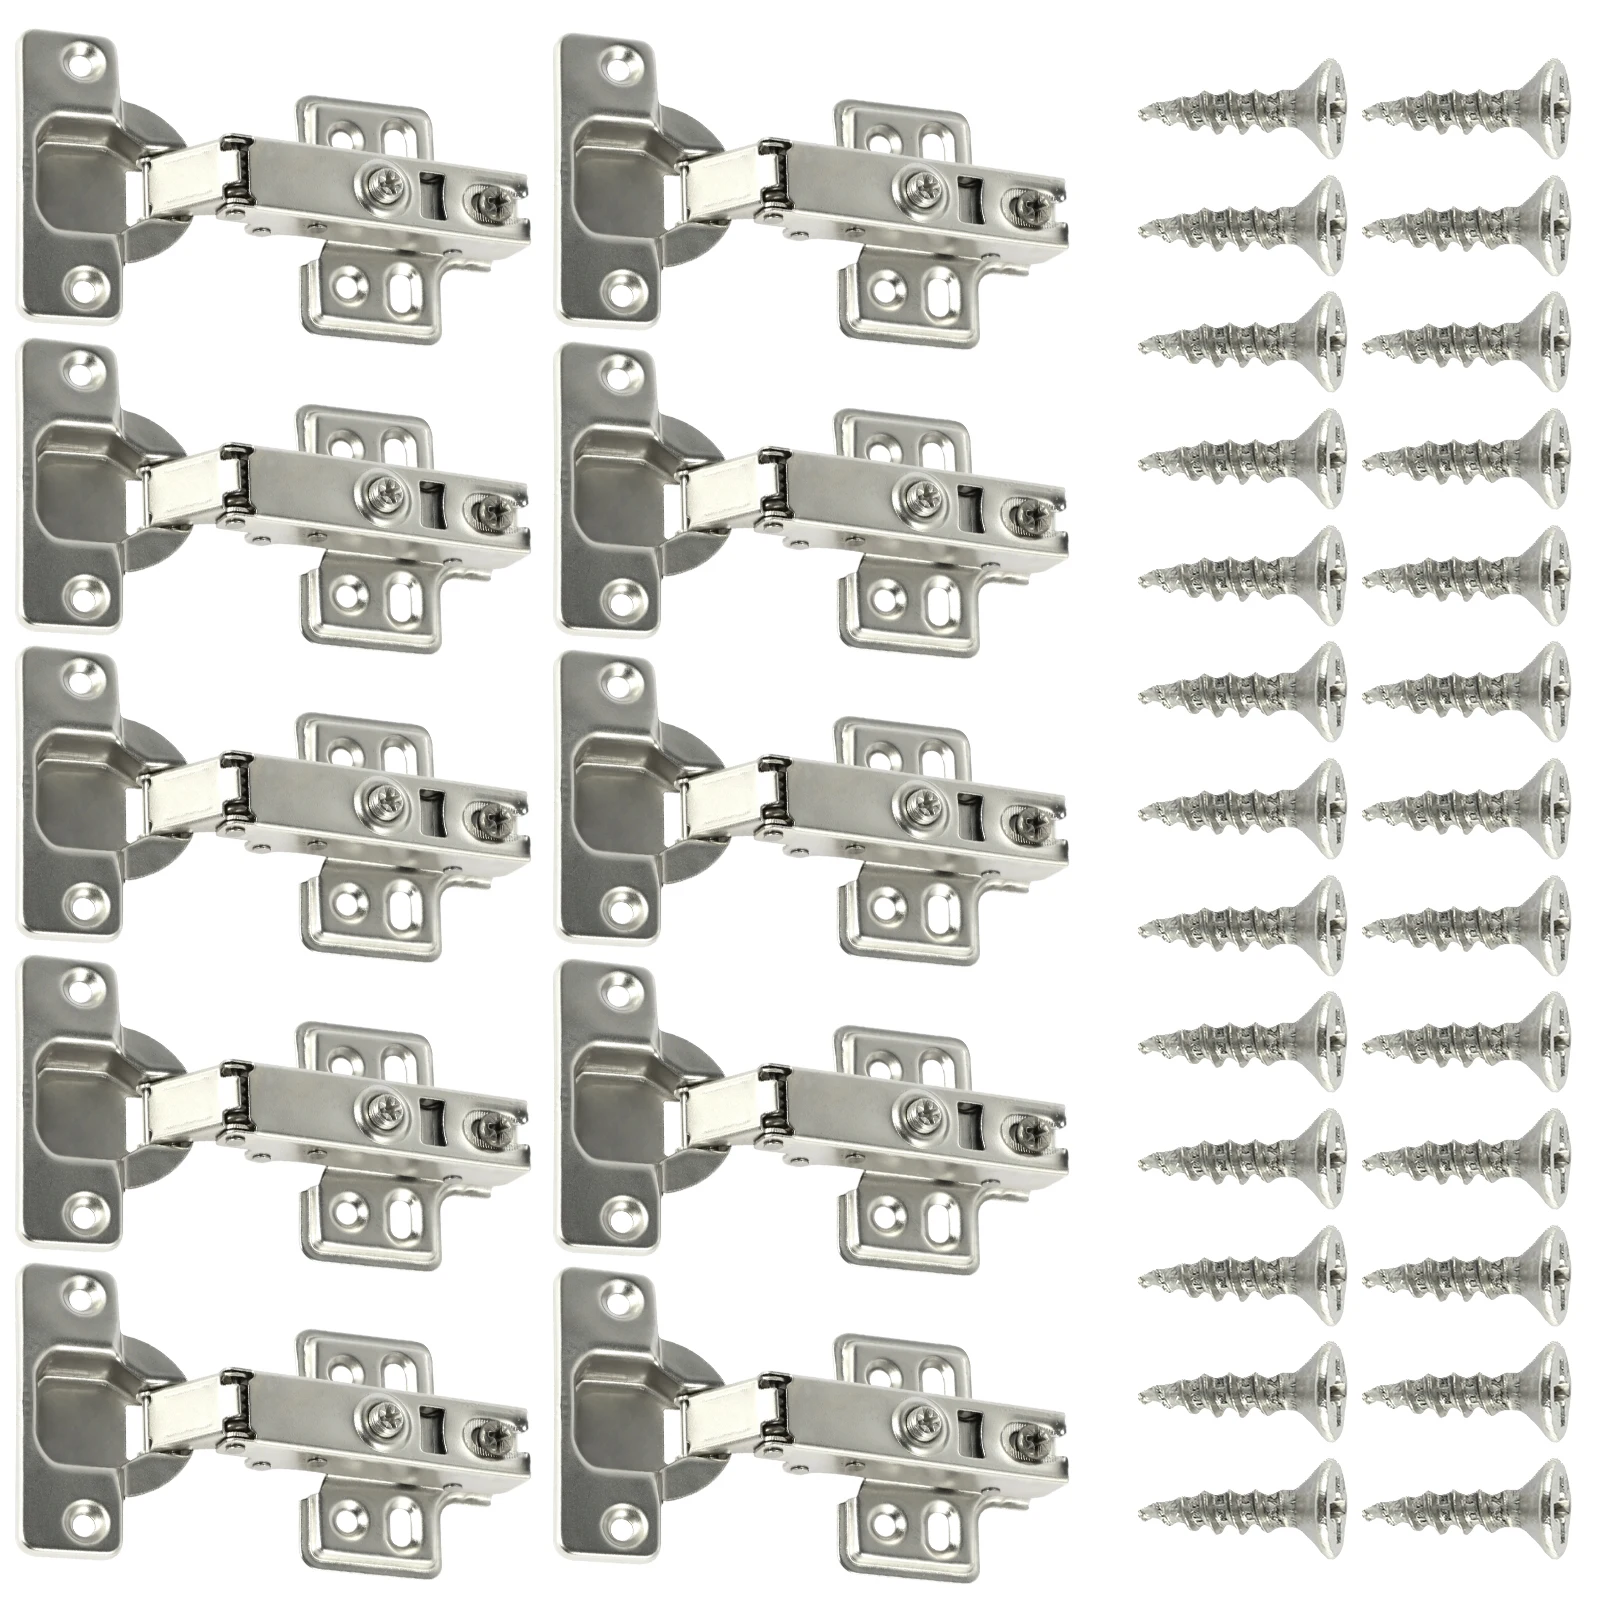 

10Pcs Cupboard Hinges Full Overlay Mute Cabinet Door Hinges Set with Screws Cold Rolled Steel Soft Close Hinges 95°-105° Opening